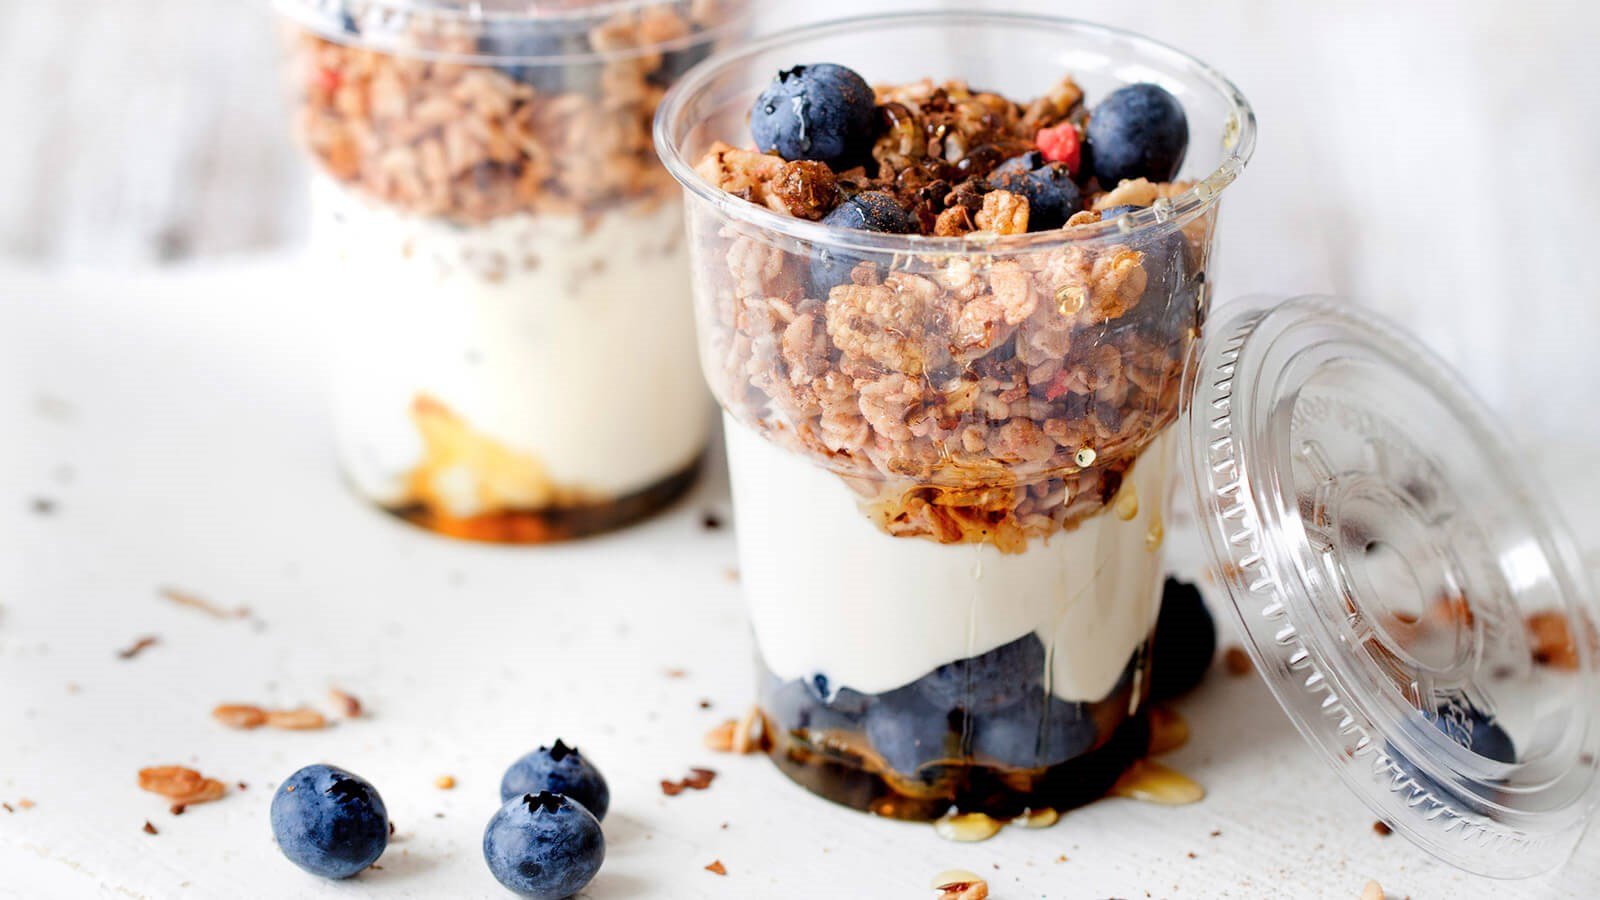 Granola with blueberrys and crème fraiche in a plastic cup